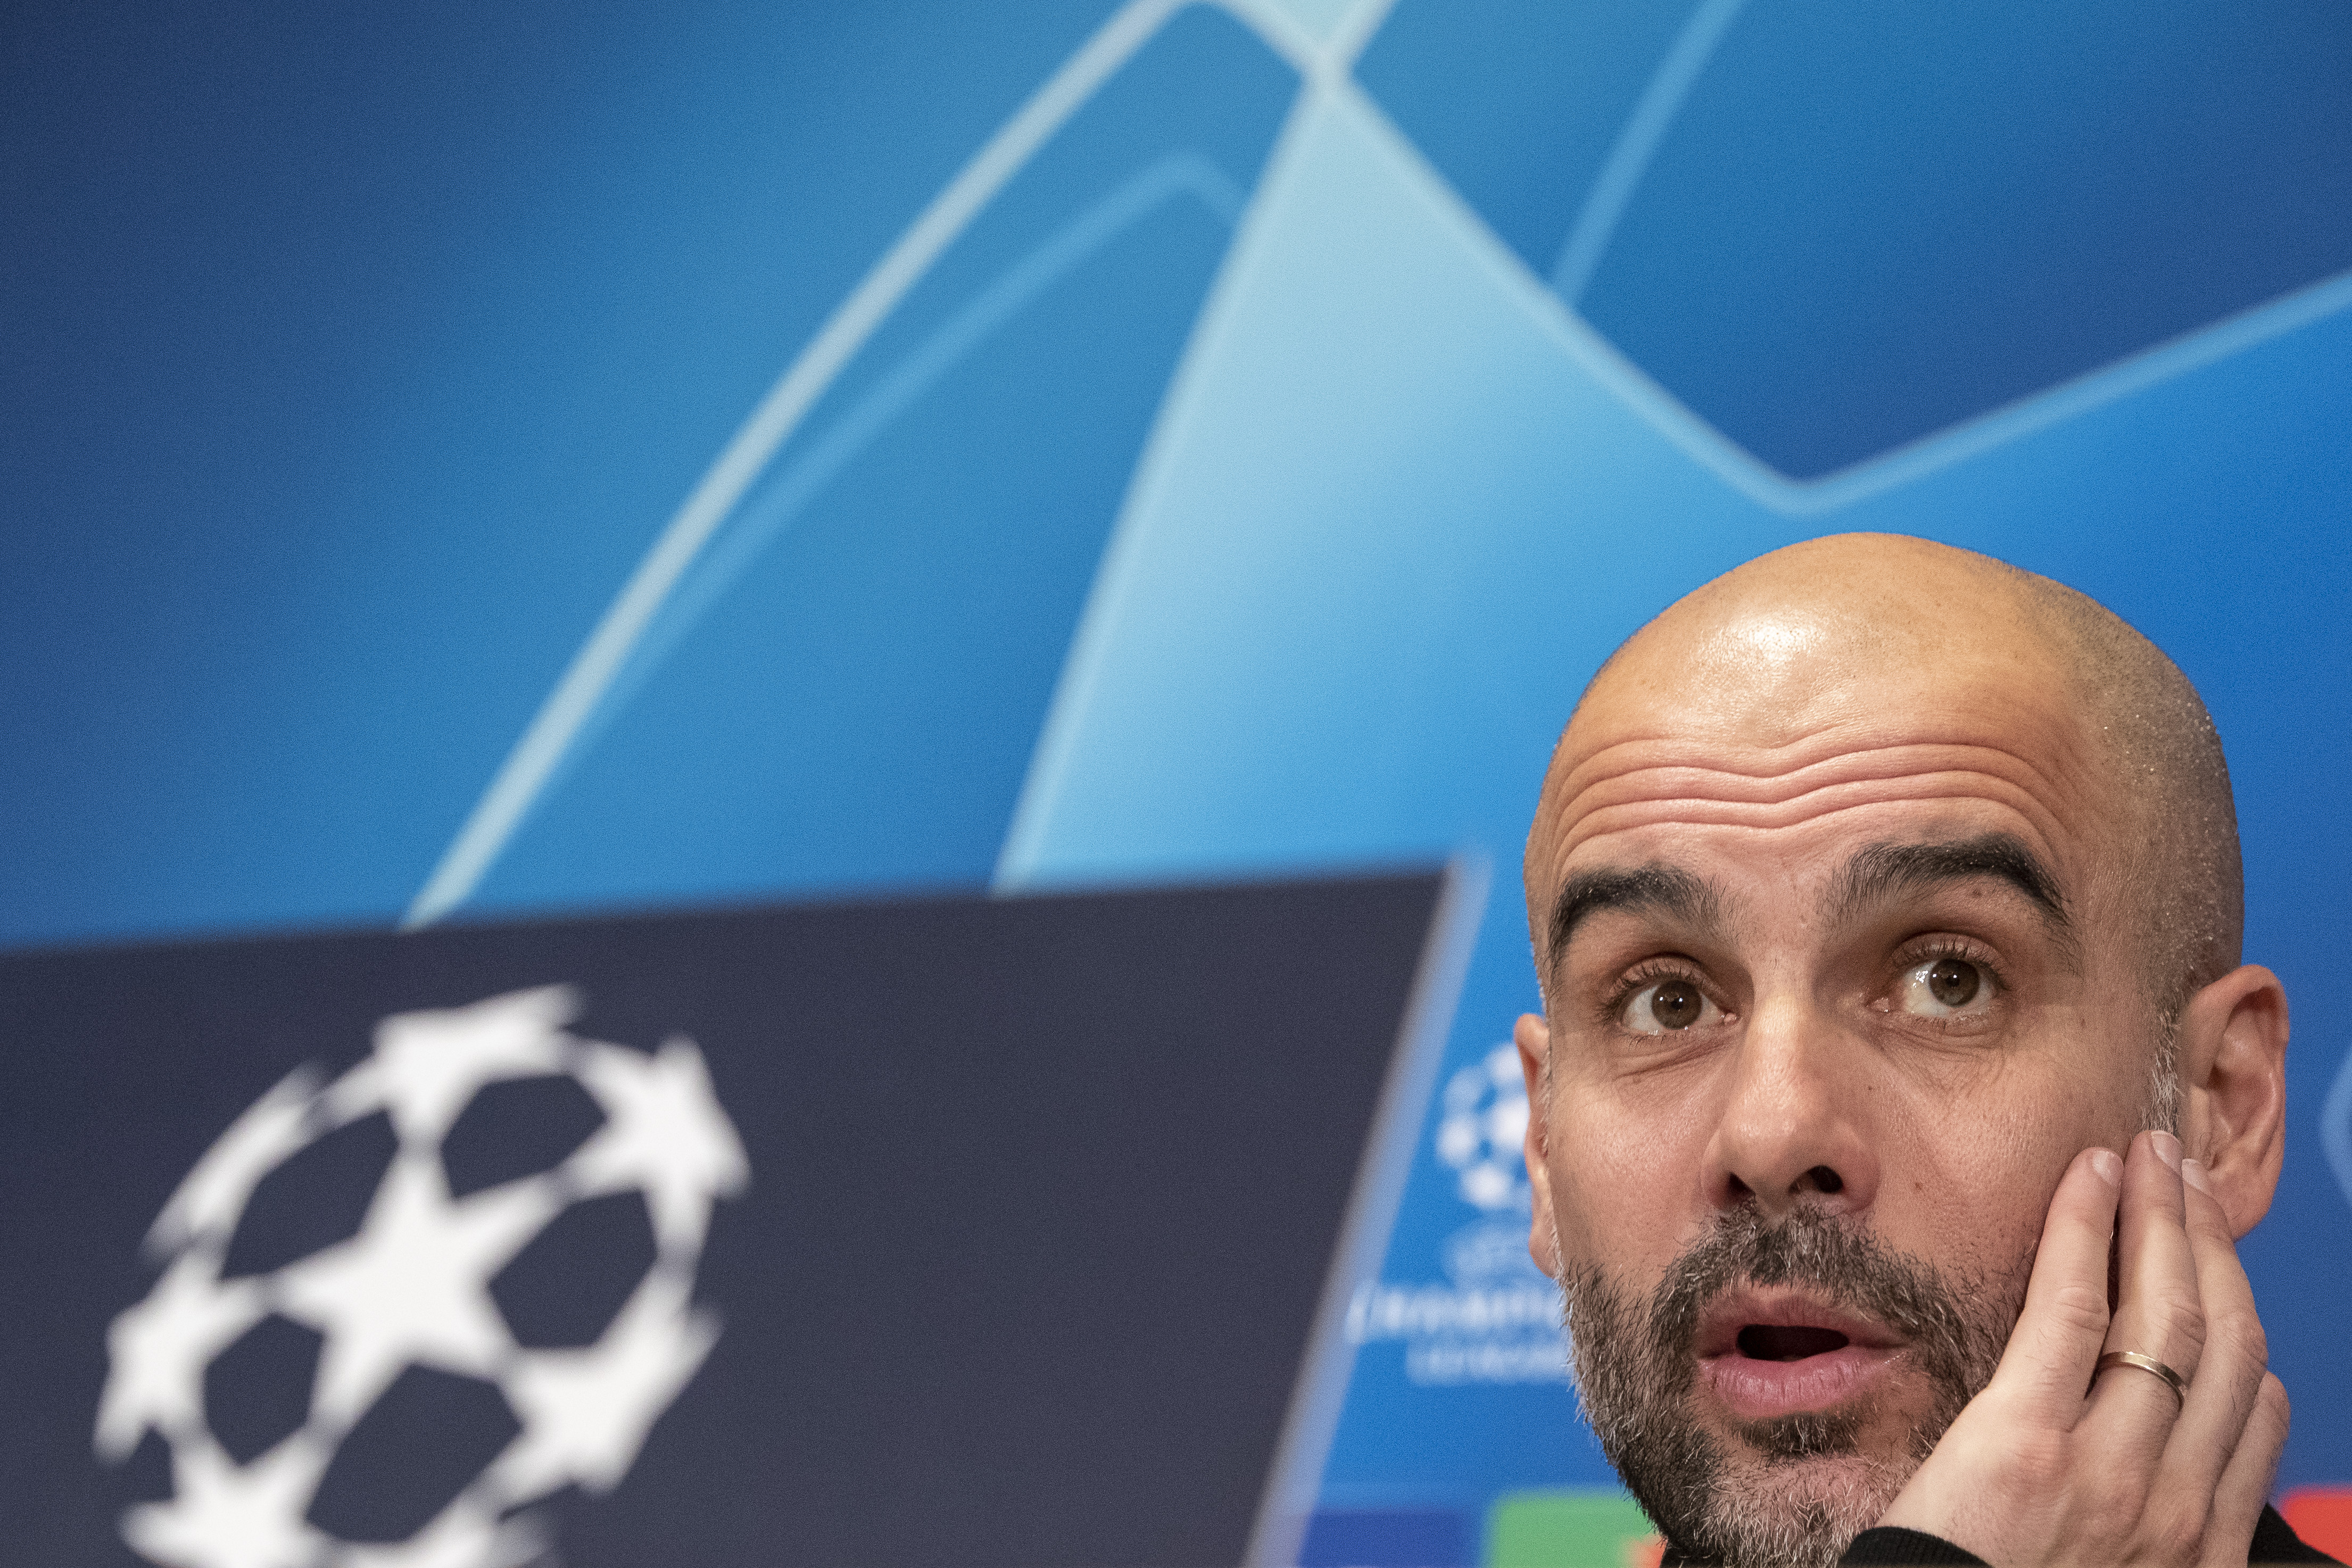 ESSEN, GERMANY - FEBRUARY 19:  Josep Guardiola, Manager of Manchester City speaks during a Manchester City press conference at Philharmonie Essen prior to the UEFA Champions League game against FC Schalke 04 on February 19, 2019 in Essen, Germany. (Photo by Maja Hitij/Bongarts/Getty Images)